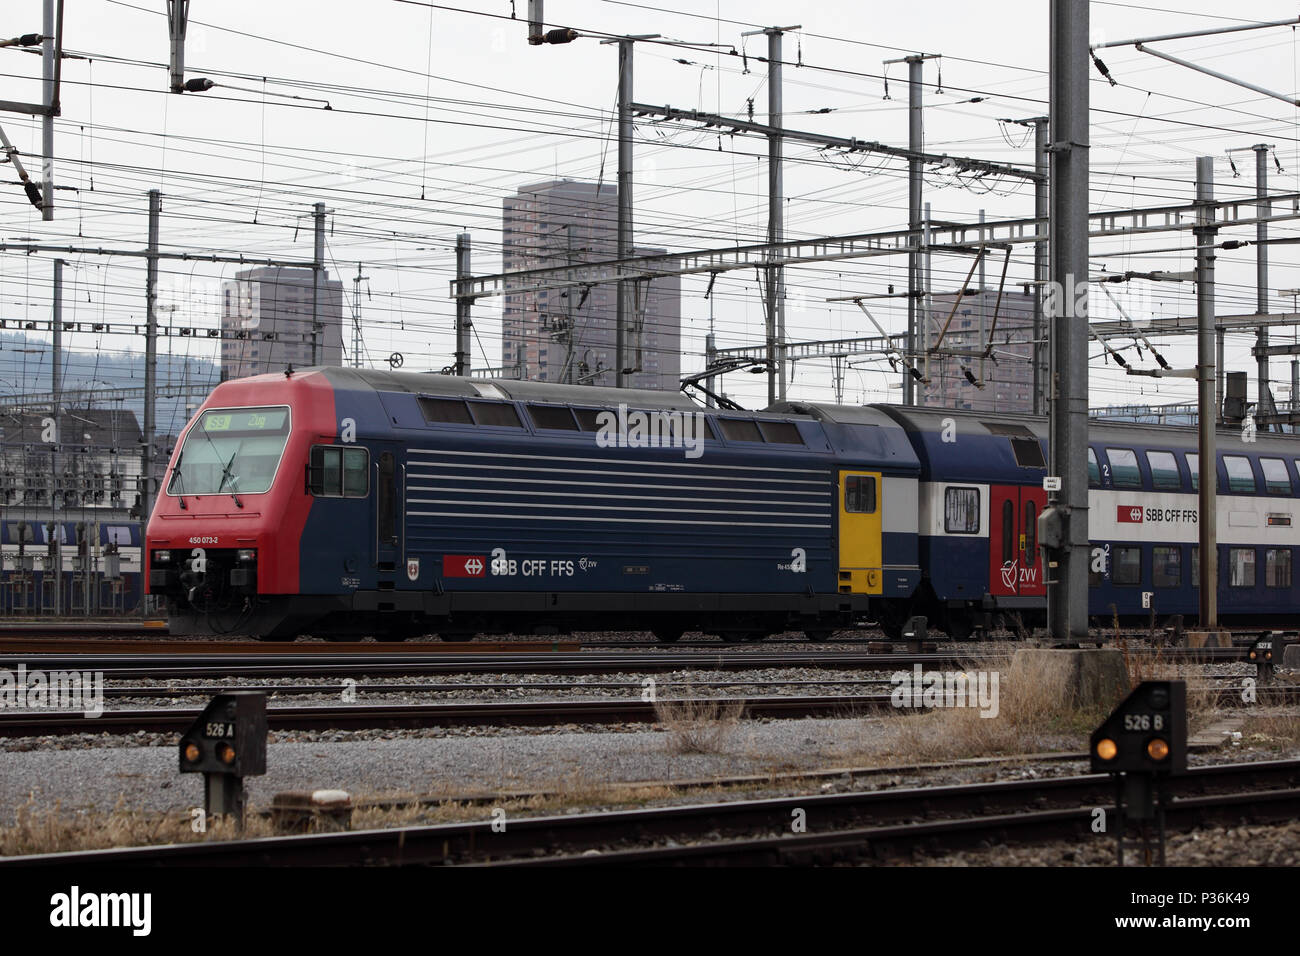 17.02.2012, Zurich, Canton Zurich, Switzerland - S-Bahn of the Swiss Federal Railways at the entrance to the main station. 00S120217D026CAROEX.JPG [MO Stock Photo